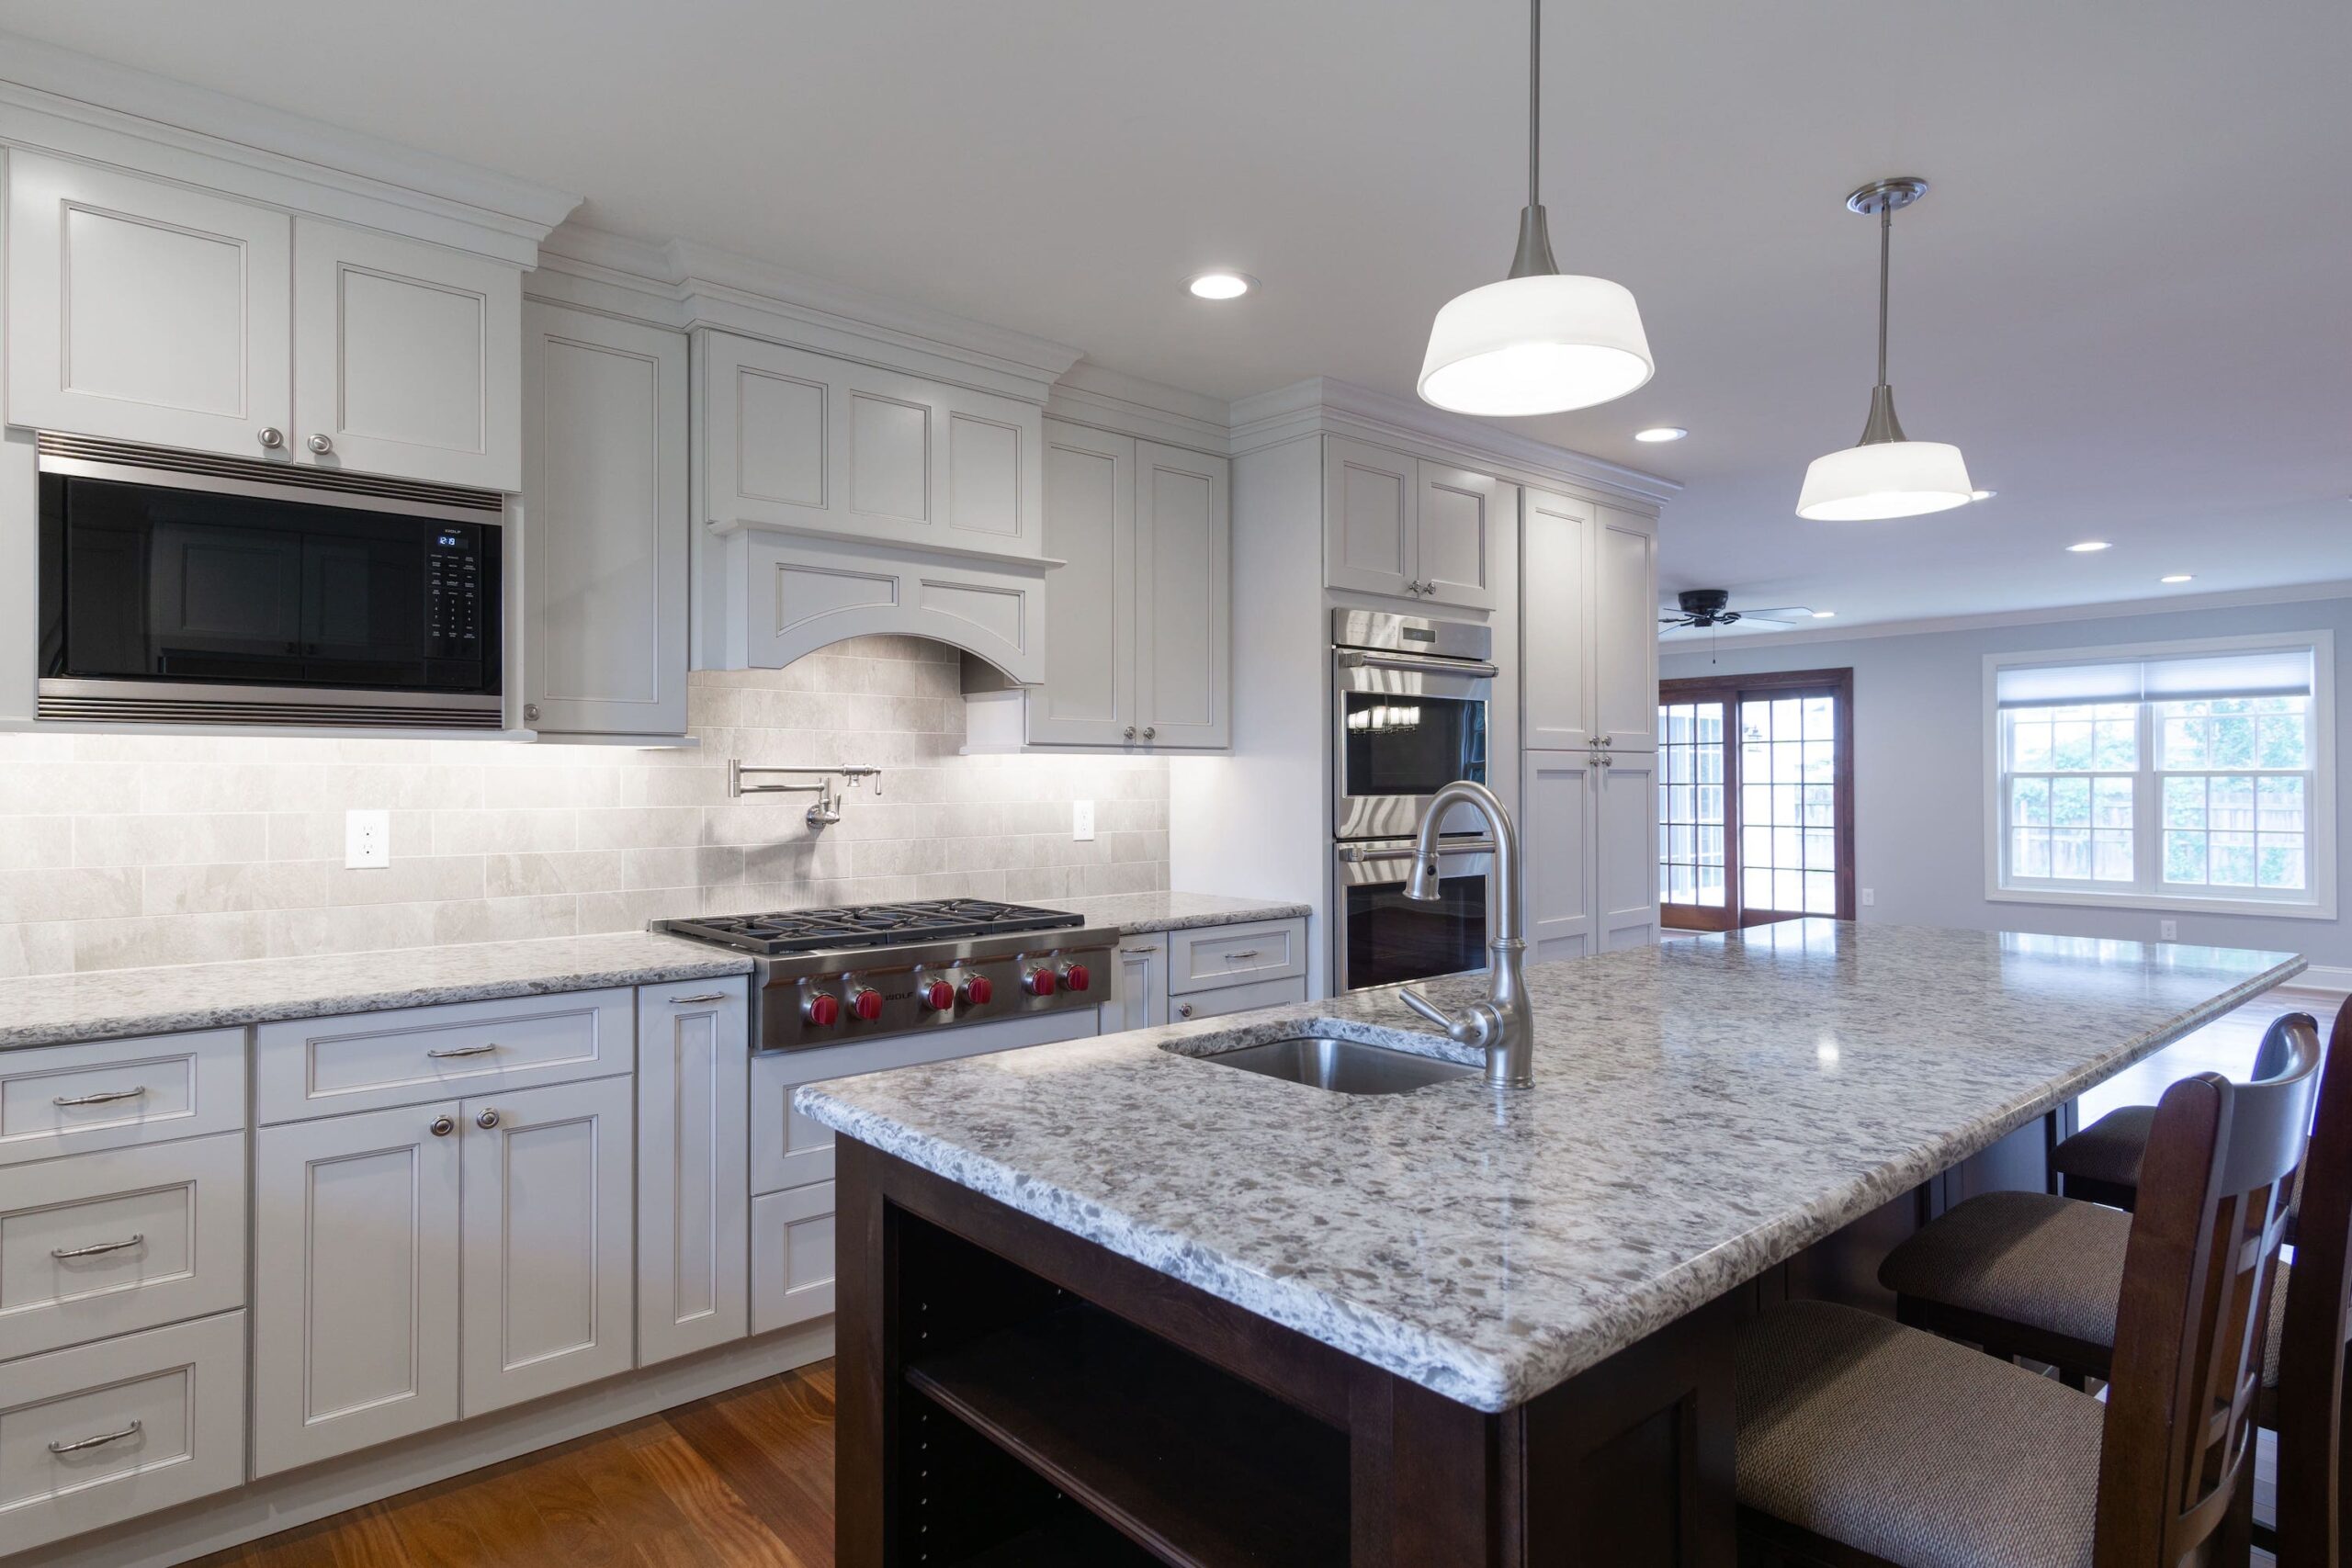 Kitchen with white cabinets and center island from amiano and son